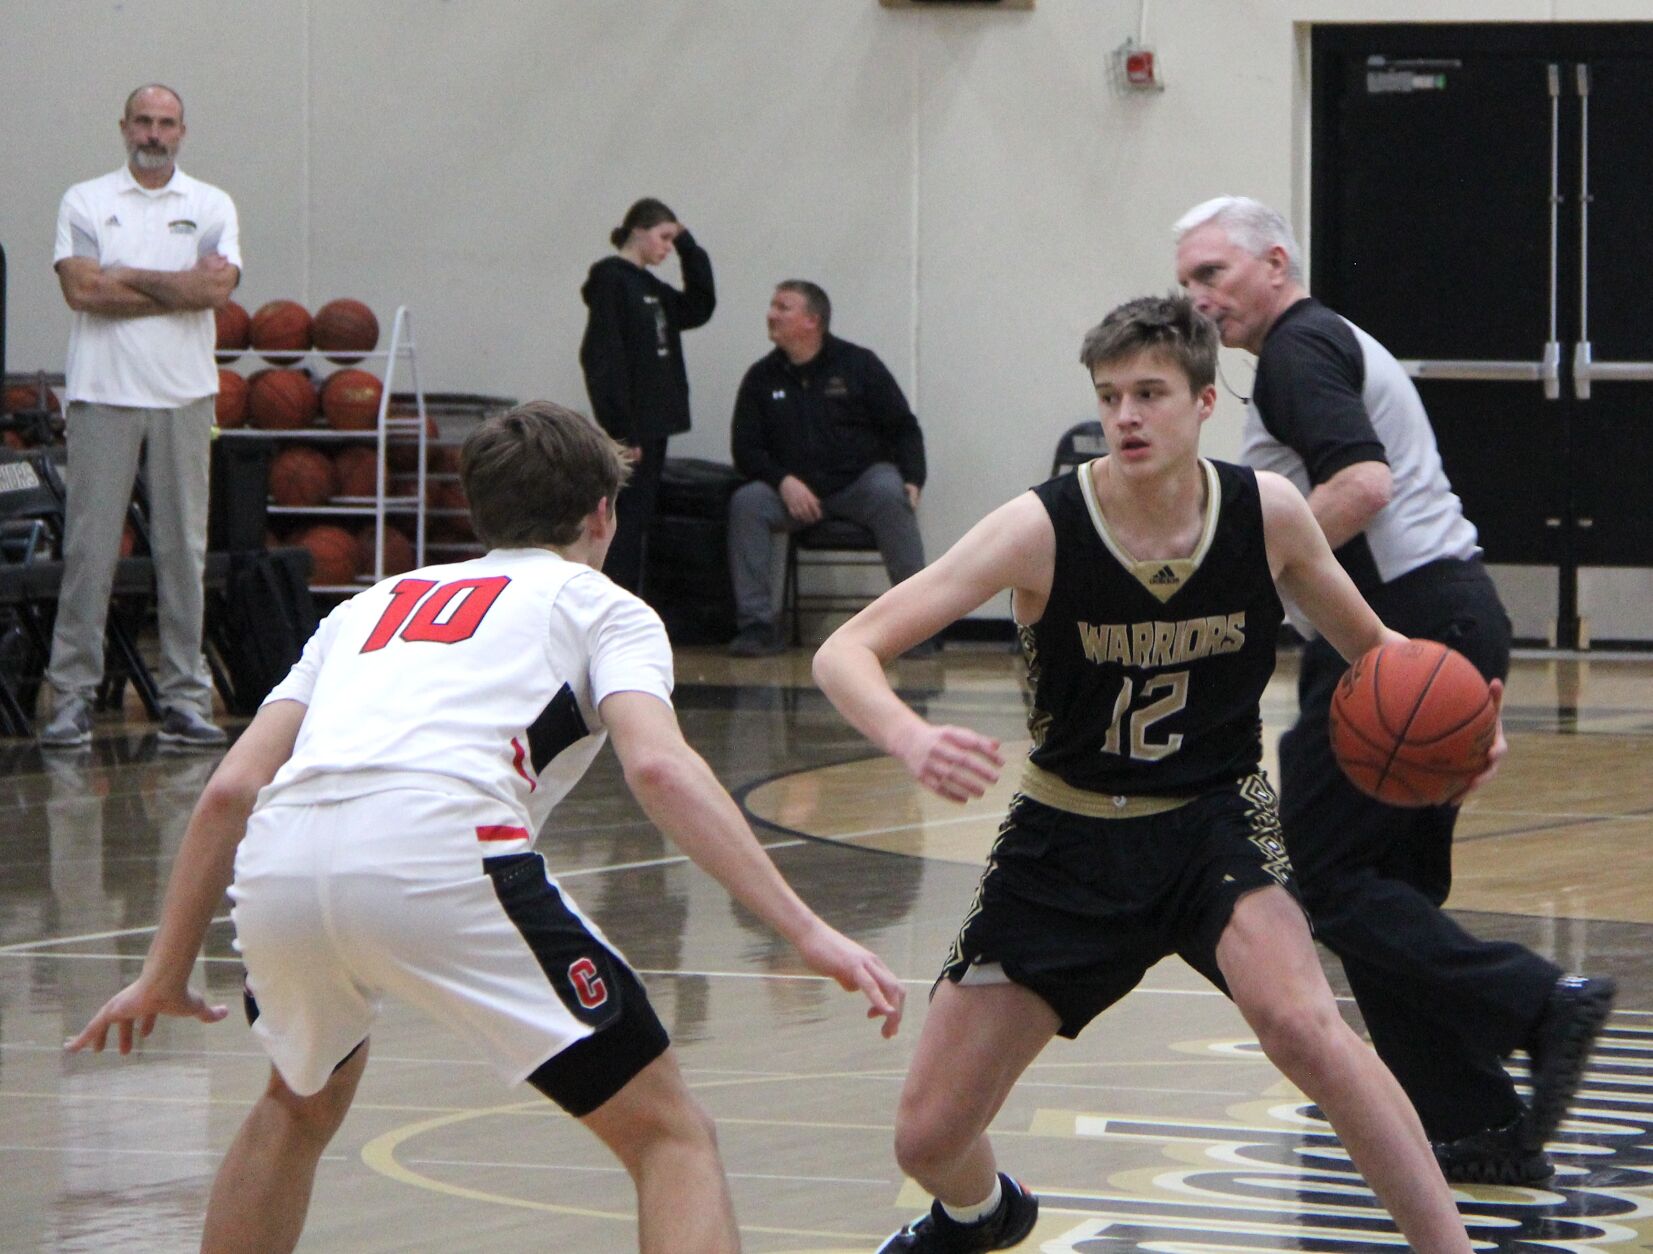 Caledonia boys rebound with wins over La Crosse Central and Winona Cotter